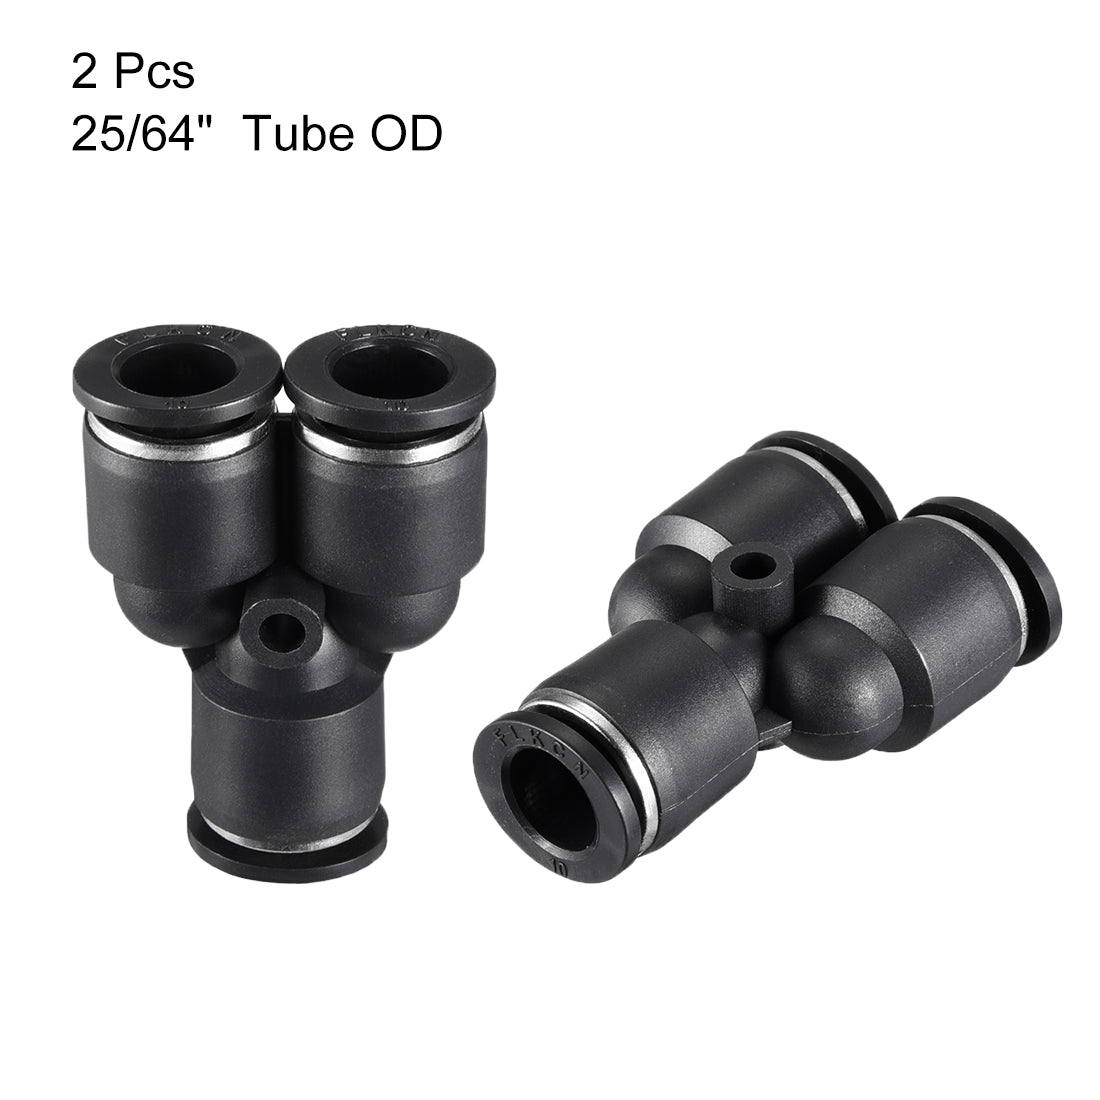 uxcell Uxcell 2pcs Push To Connect Fittings Y Type Tube Connect 10 mm or 25/64" od Push Fit Fittings Tube Fittings Push Lock Black(10mm Y tee)